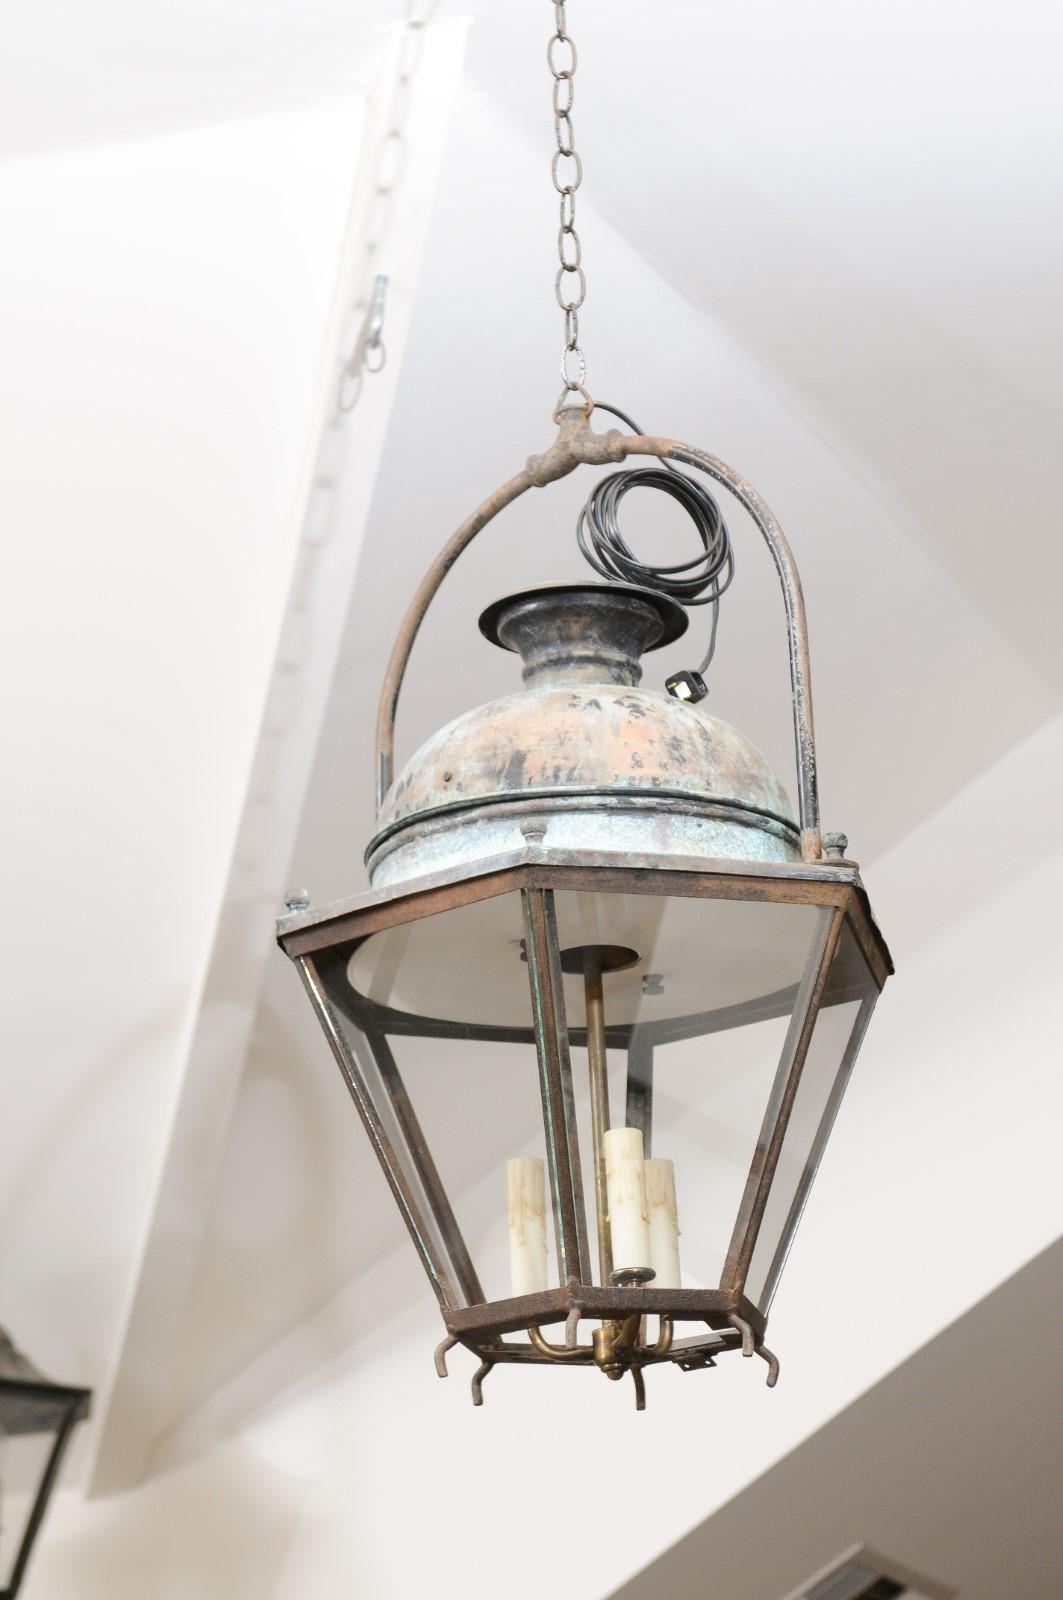 A French Provençal copper and iron hexagonal lantern from the early 20th century, with three lights and glass panels. Created in Southern France at the Turn of the Century, this lantern features a copper dome with verdigris patina, sitting above an